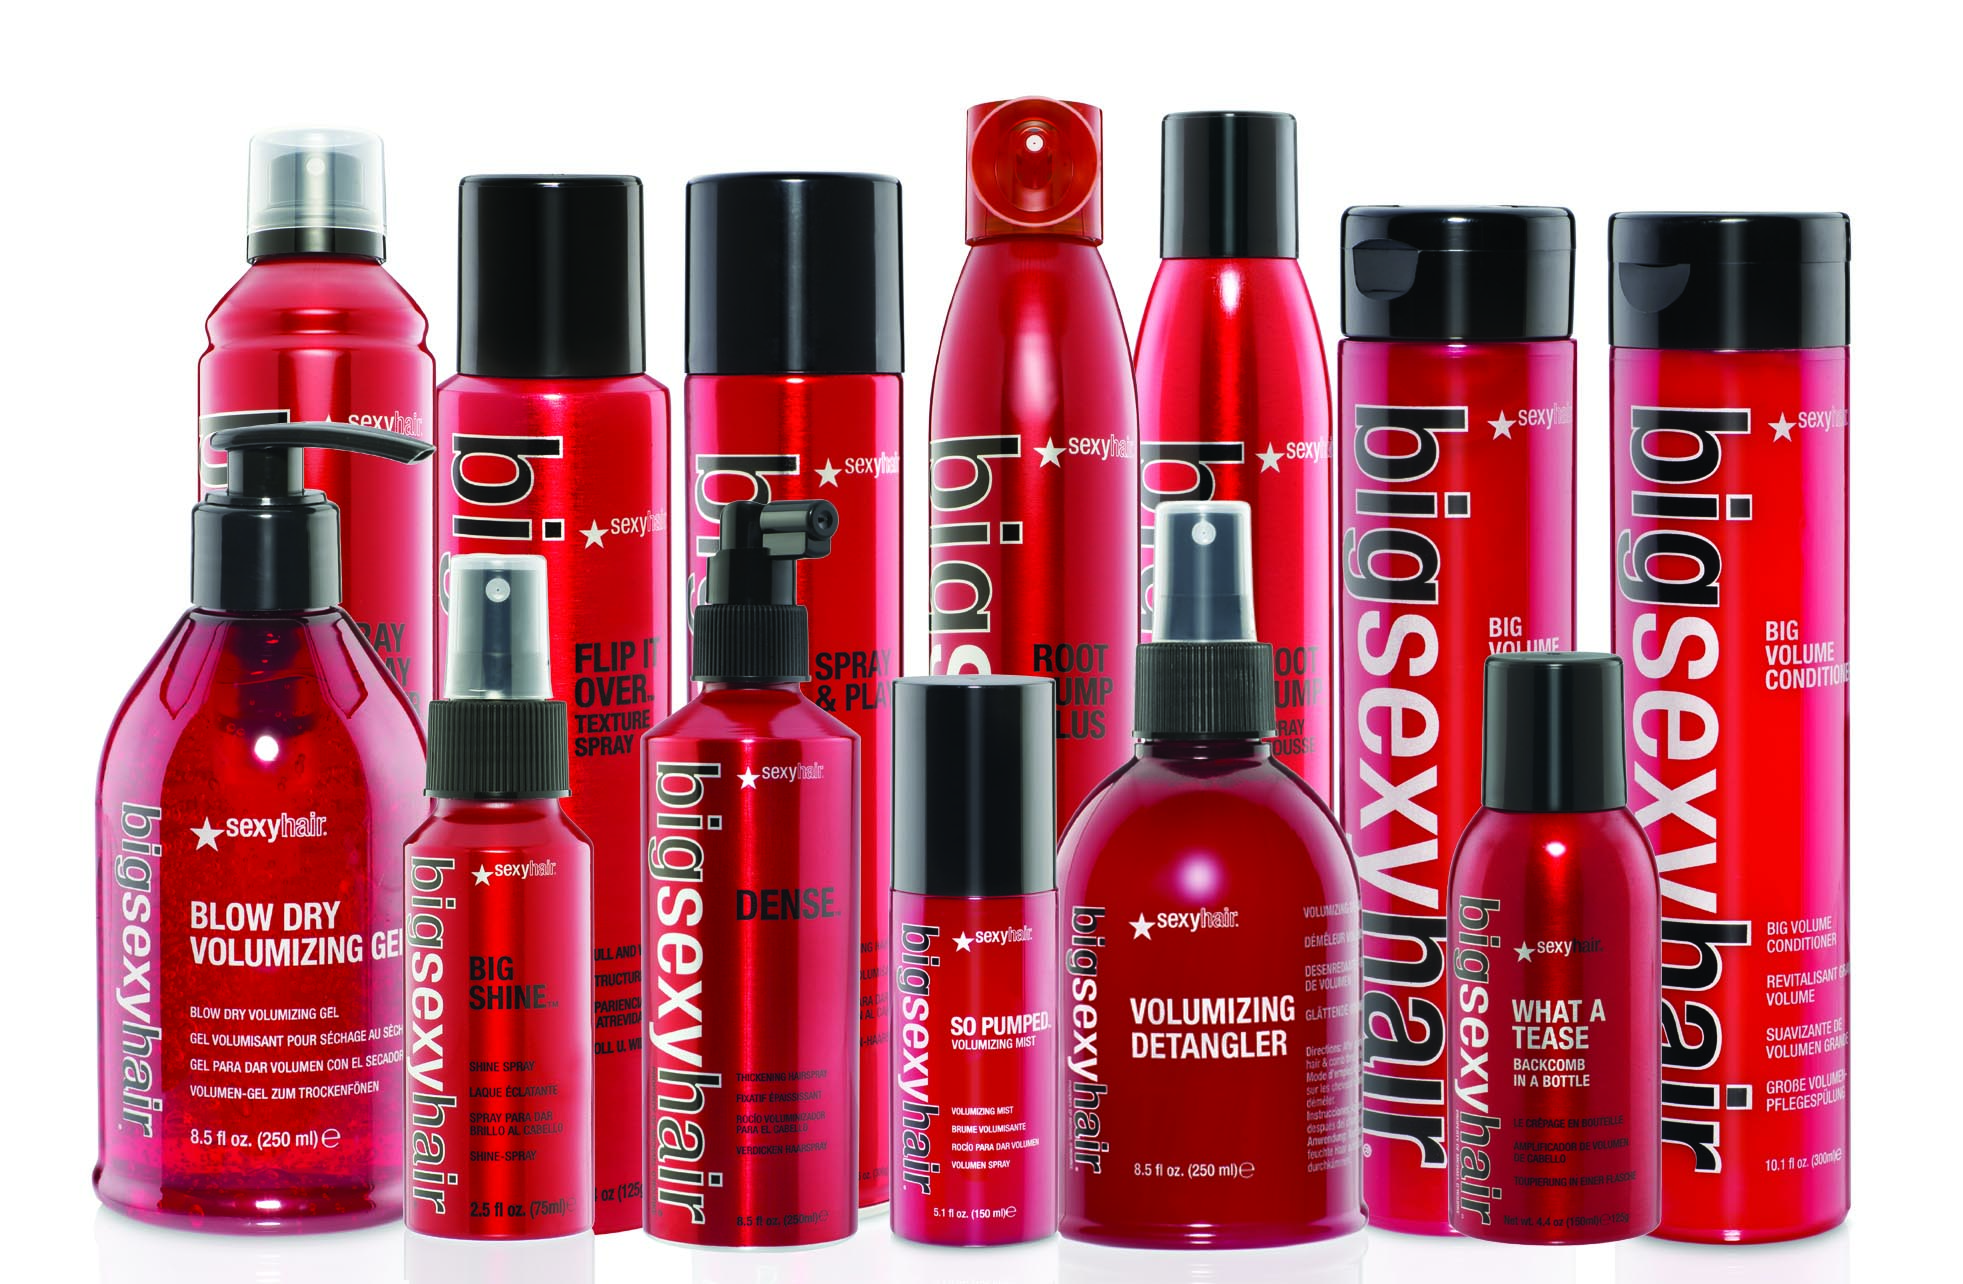 Tips to Finding the Best Hair Products - Salon Price Lady - Website